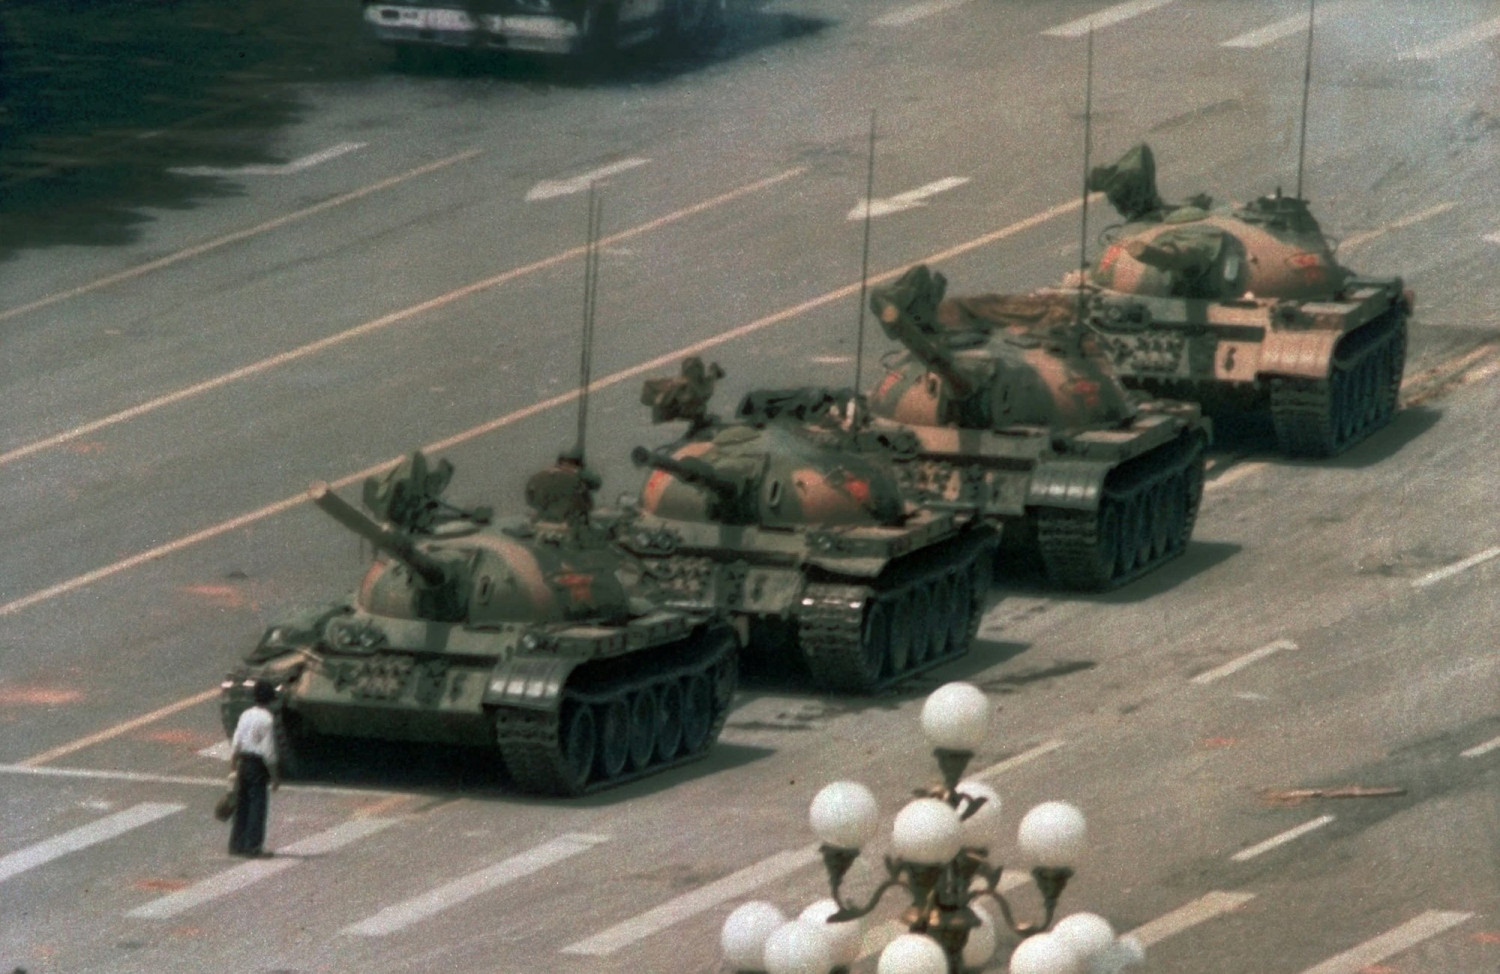 Twitter Suspends Accounts Critical of Chinese Regime Days Before Tiananmen Anniversary